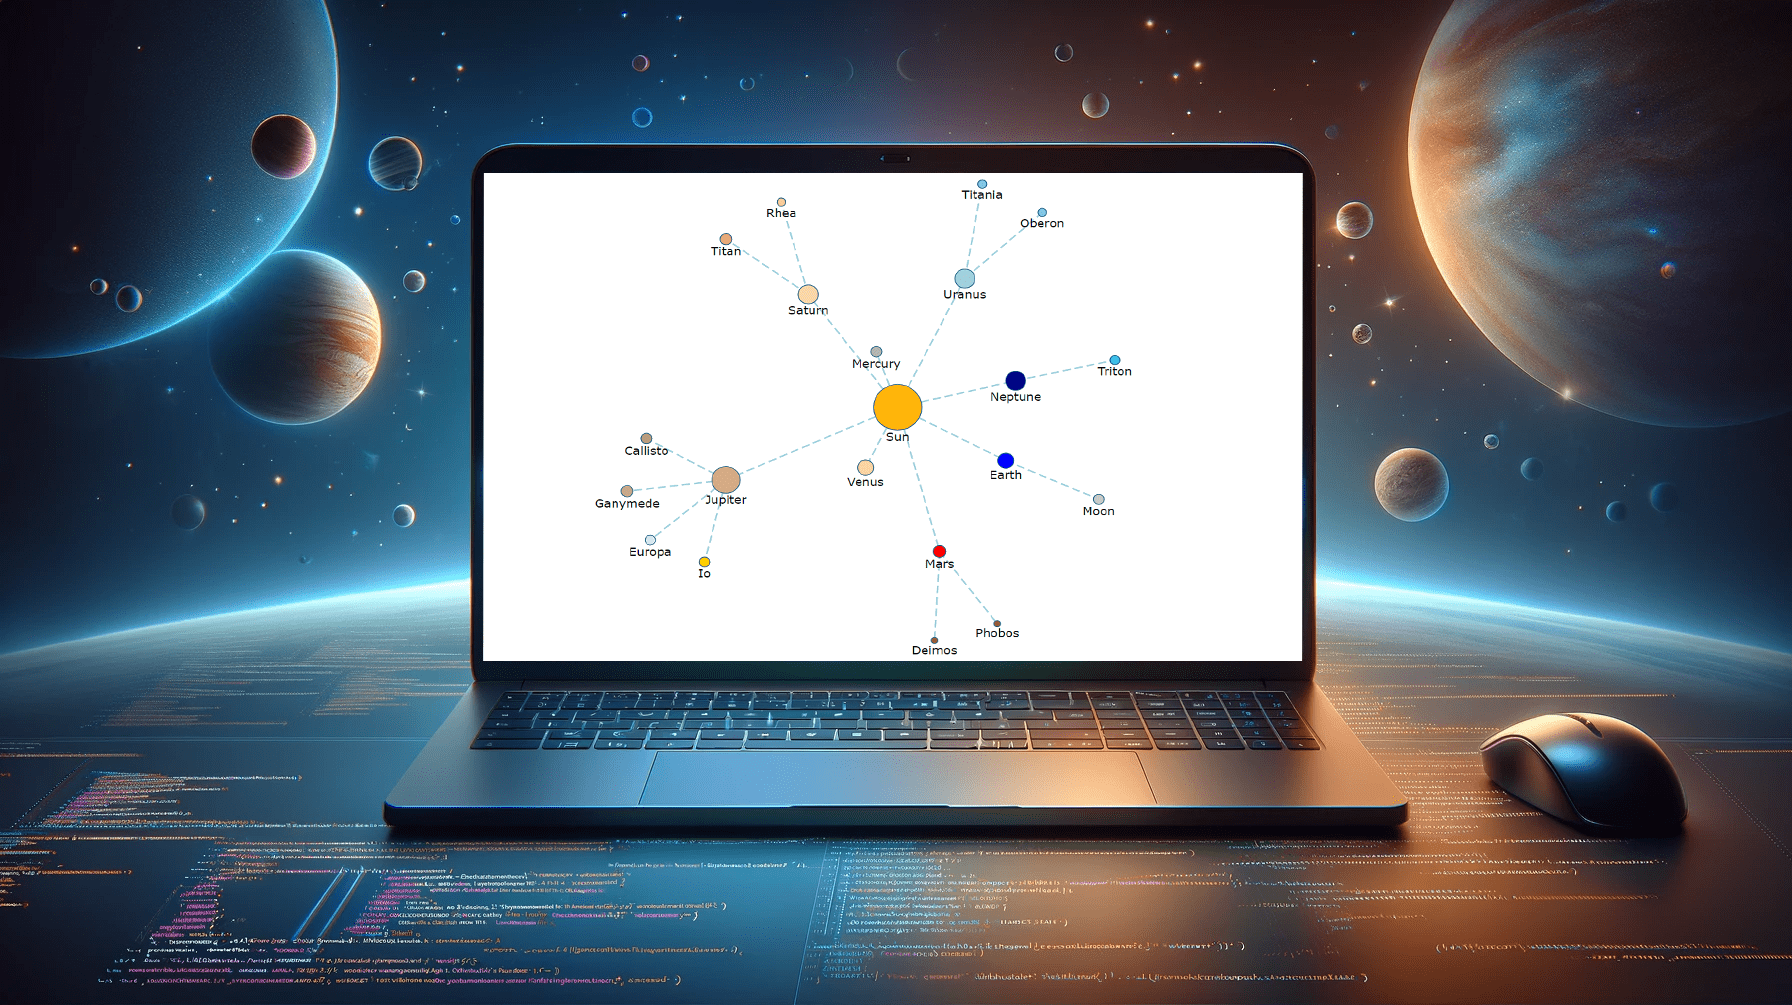 Network Graph based on JavaScript visualizing our Solar System network for the tutorial